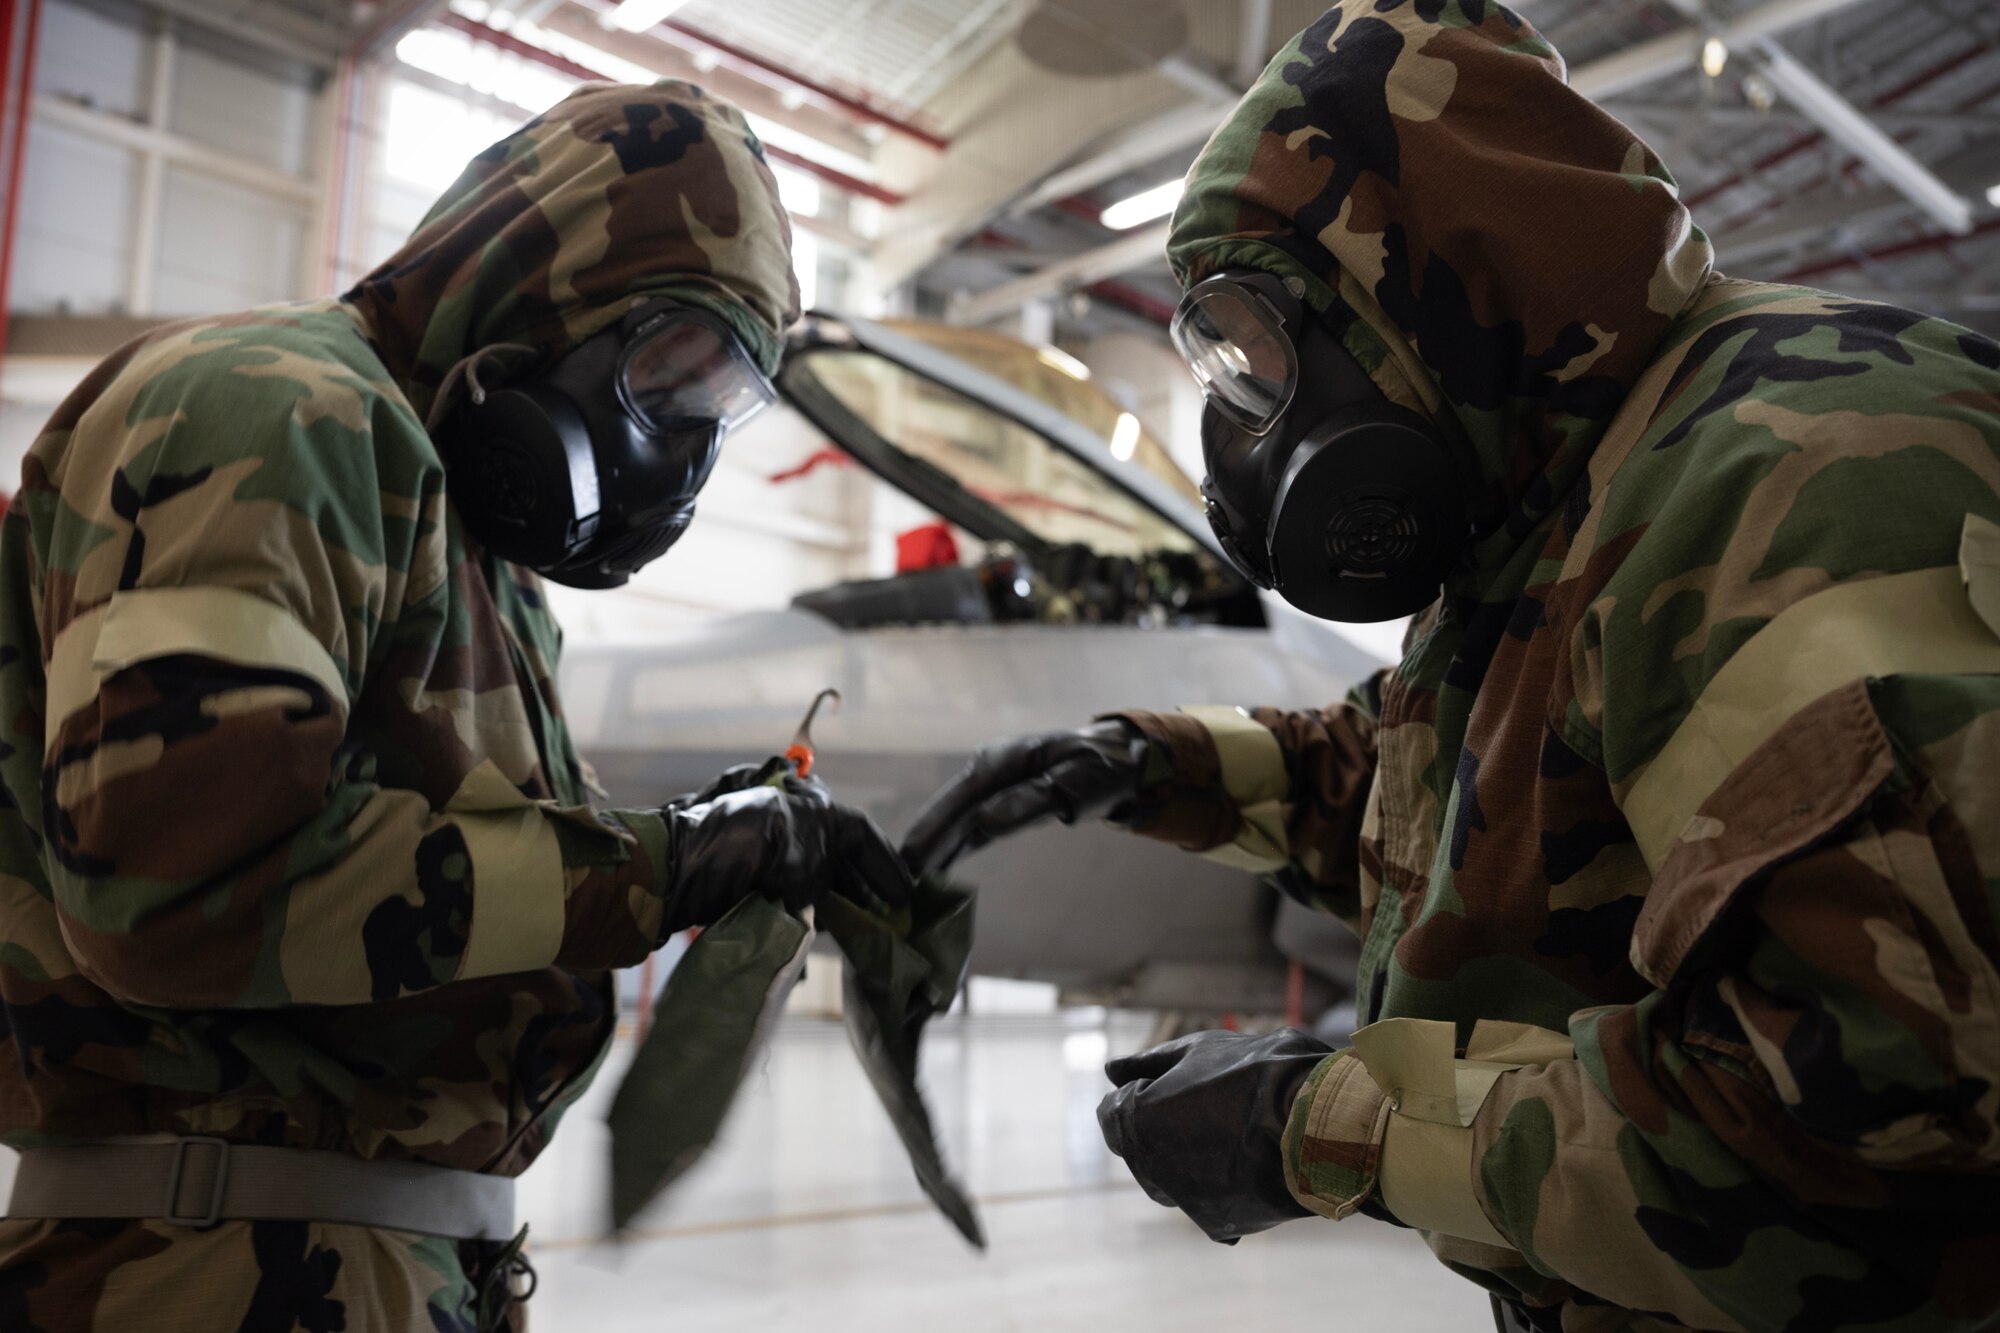 U.S. Air Force Master Sgt. Terrance Akana, 154th Operations Support Squadron aircrew flight equipment craftsman, utilizes an over-cloak that provides an extra layer of protection on Capt. Alex “Doom” Moss, 19th Fighter Squadron F-22 Raptor pilot, during a Next Generation Aircrew Protection Step-Launch and Recover concept of operation demonstration, Joint-Base Pearl Harbor-Hickam, Hawaii, May 11, 2023. The demonstration showcases the Pacific Air Forces stop gap for the F-22 Aircrew Chemical, Biological, Radiological and Nuclear limiting factor utilizing the modified M-50 ground crew mask. (U.S. Air National Guard photo by Master Sgt. Mysti Bicoy)